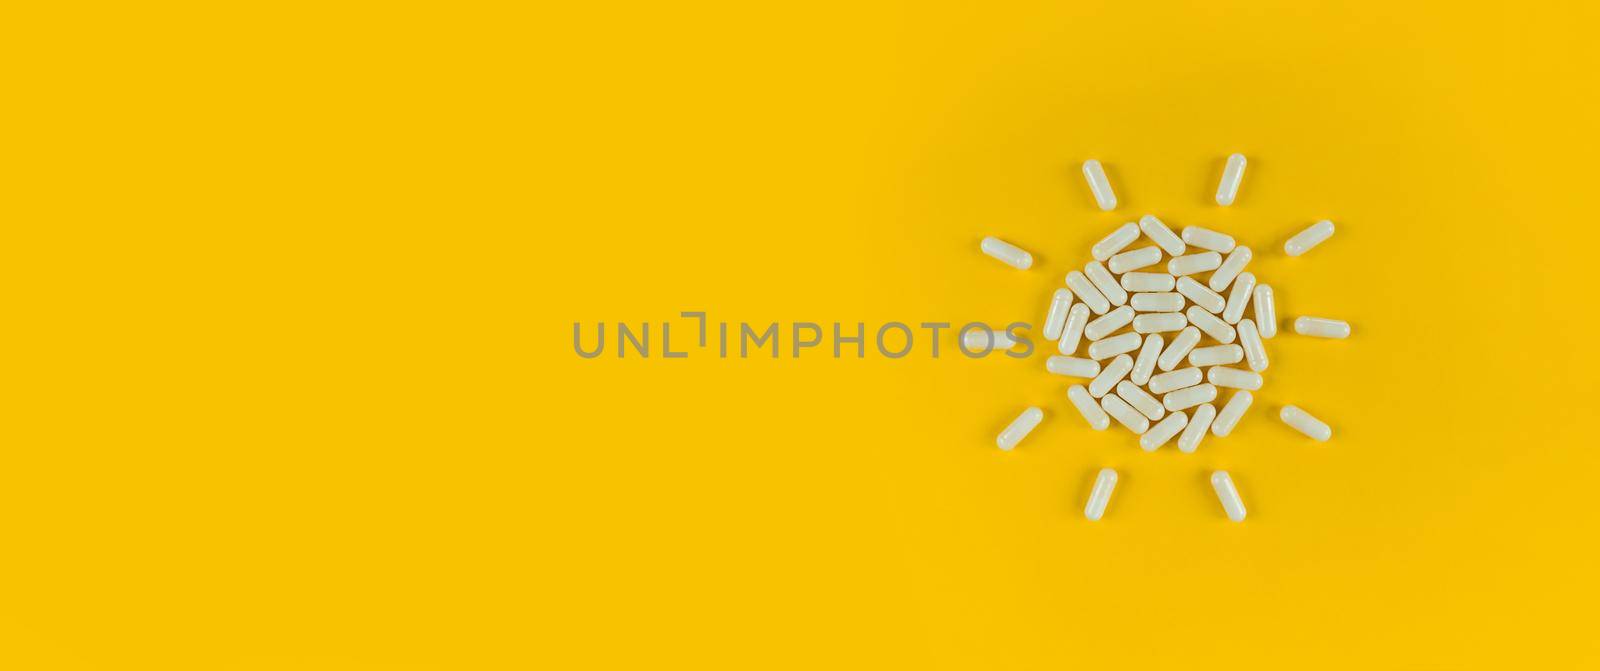 Sun shape made from white pills capsules on a yellow backdrop with copy space.